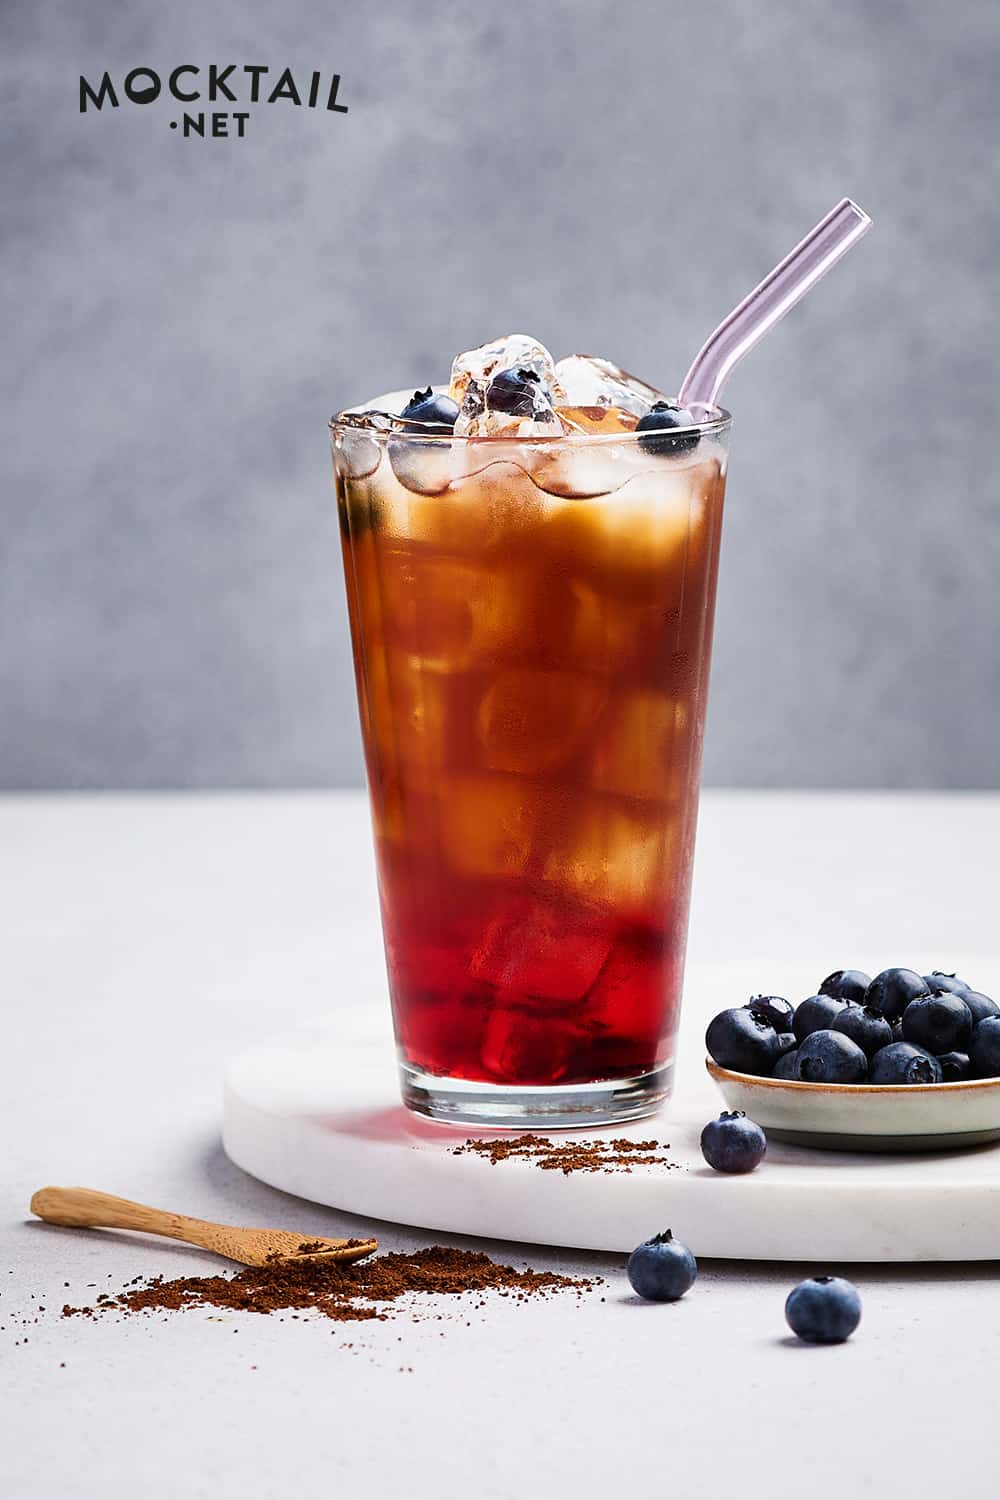 Add the blueberry syrup and cold coffee to a tall glass.